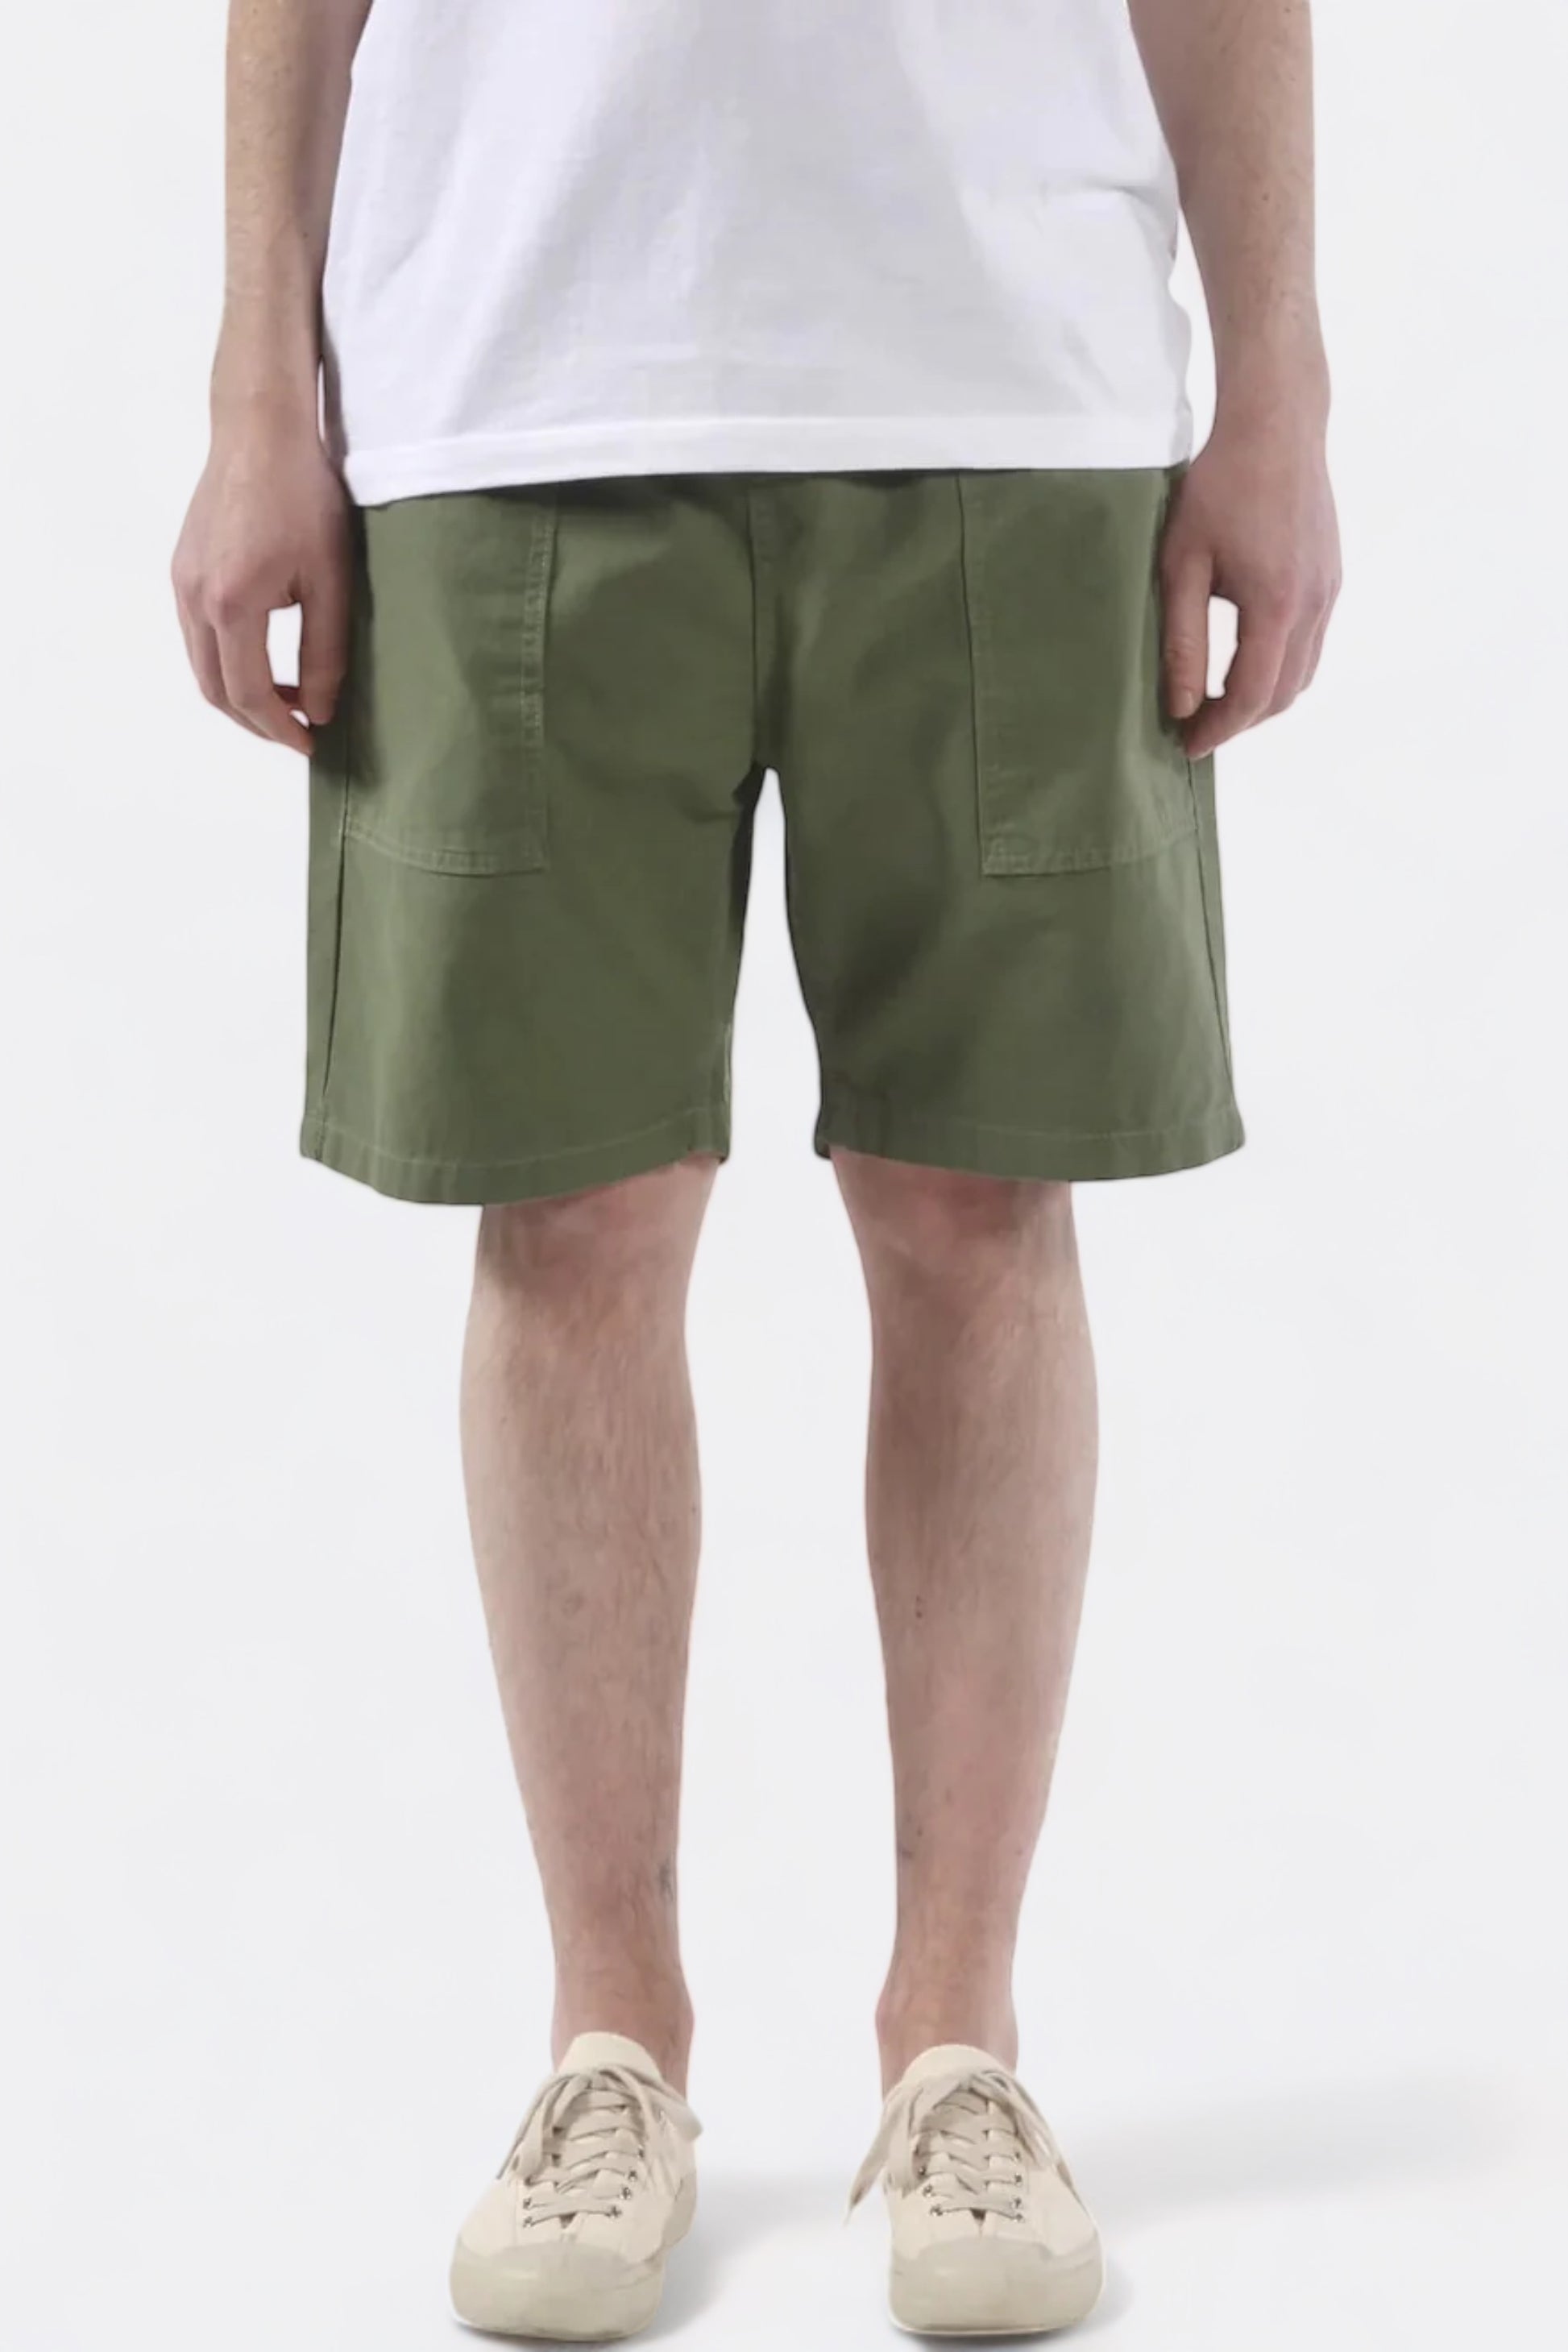 Service Works - Ripstop Chef Shorts (Black)